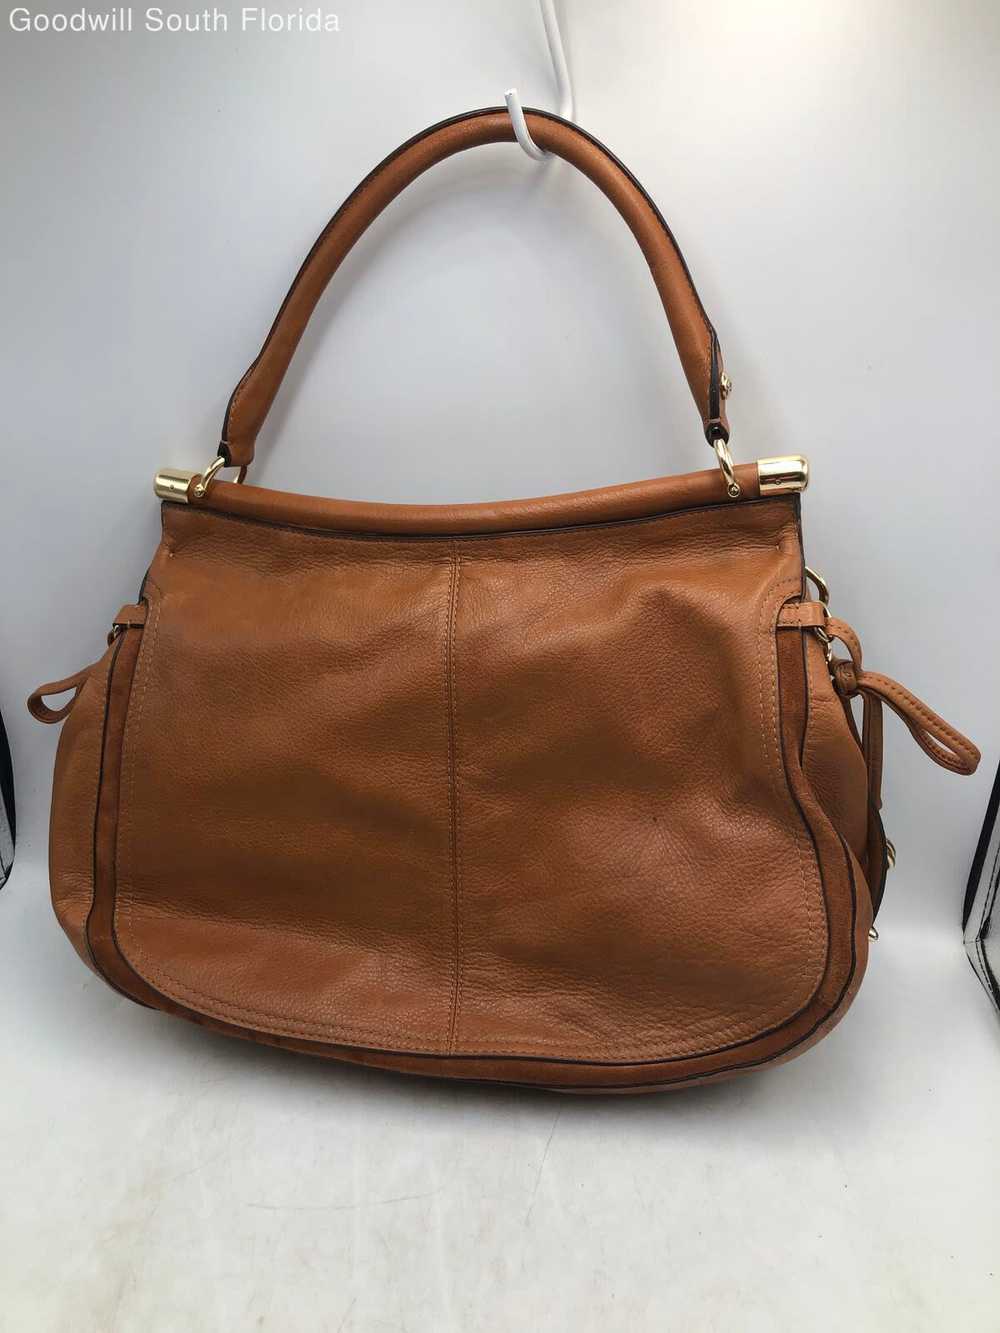 Coach Womens Leather Brown Bag - image 2